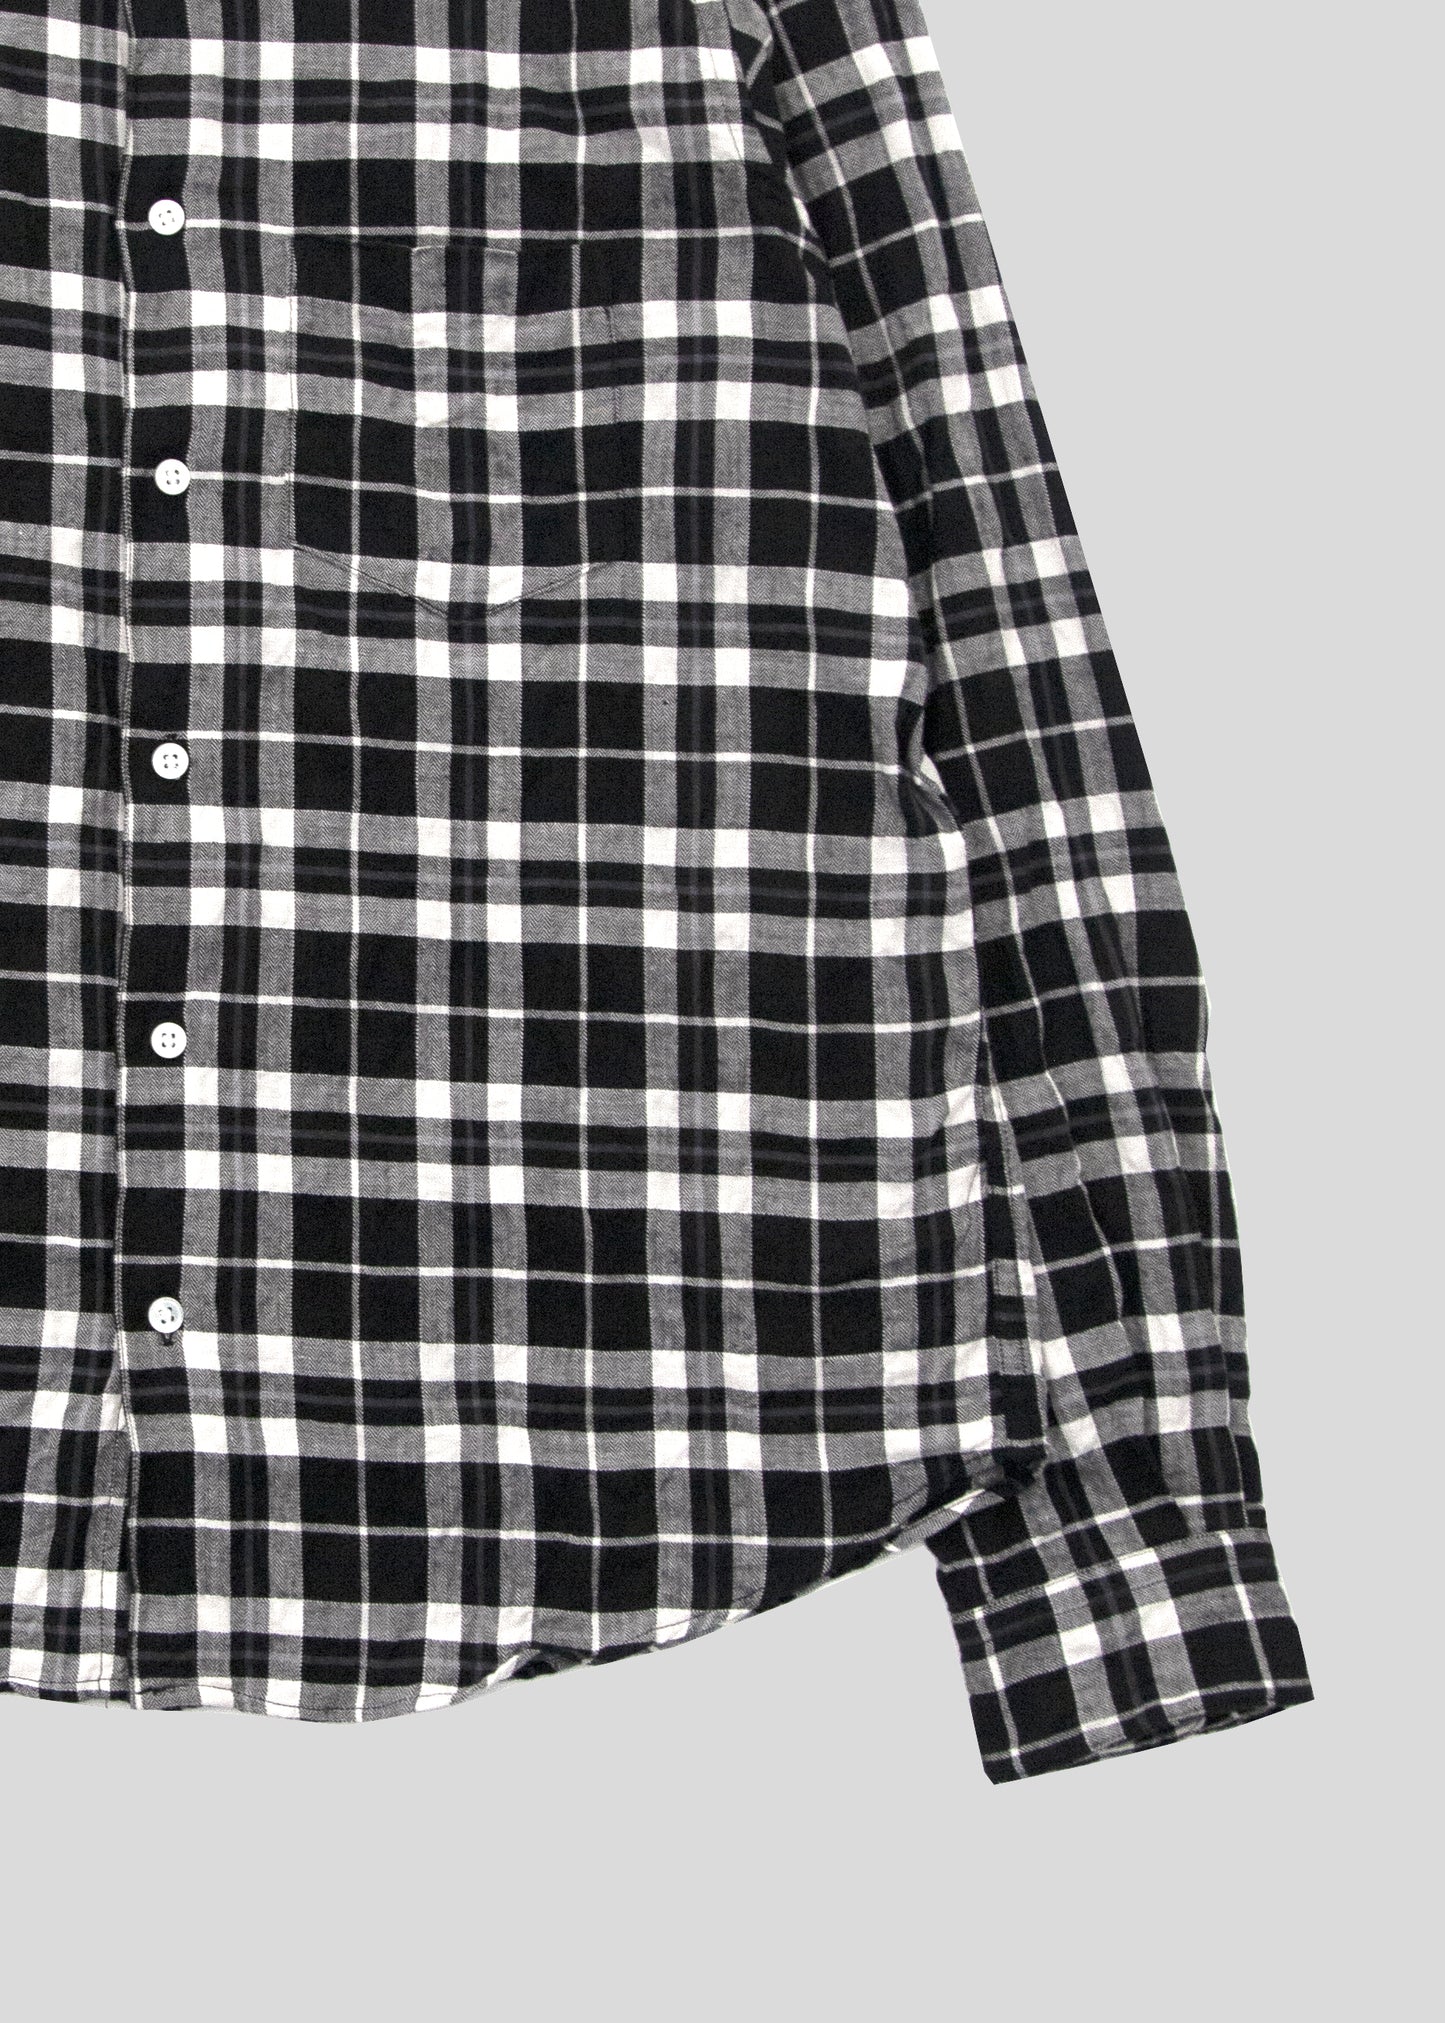 Single Needle Shirt, Black and White Pucker Flannel